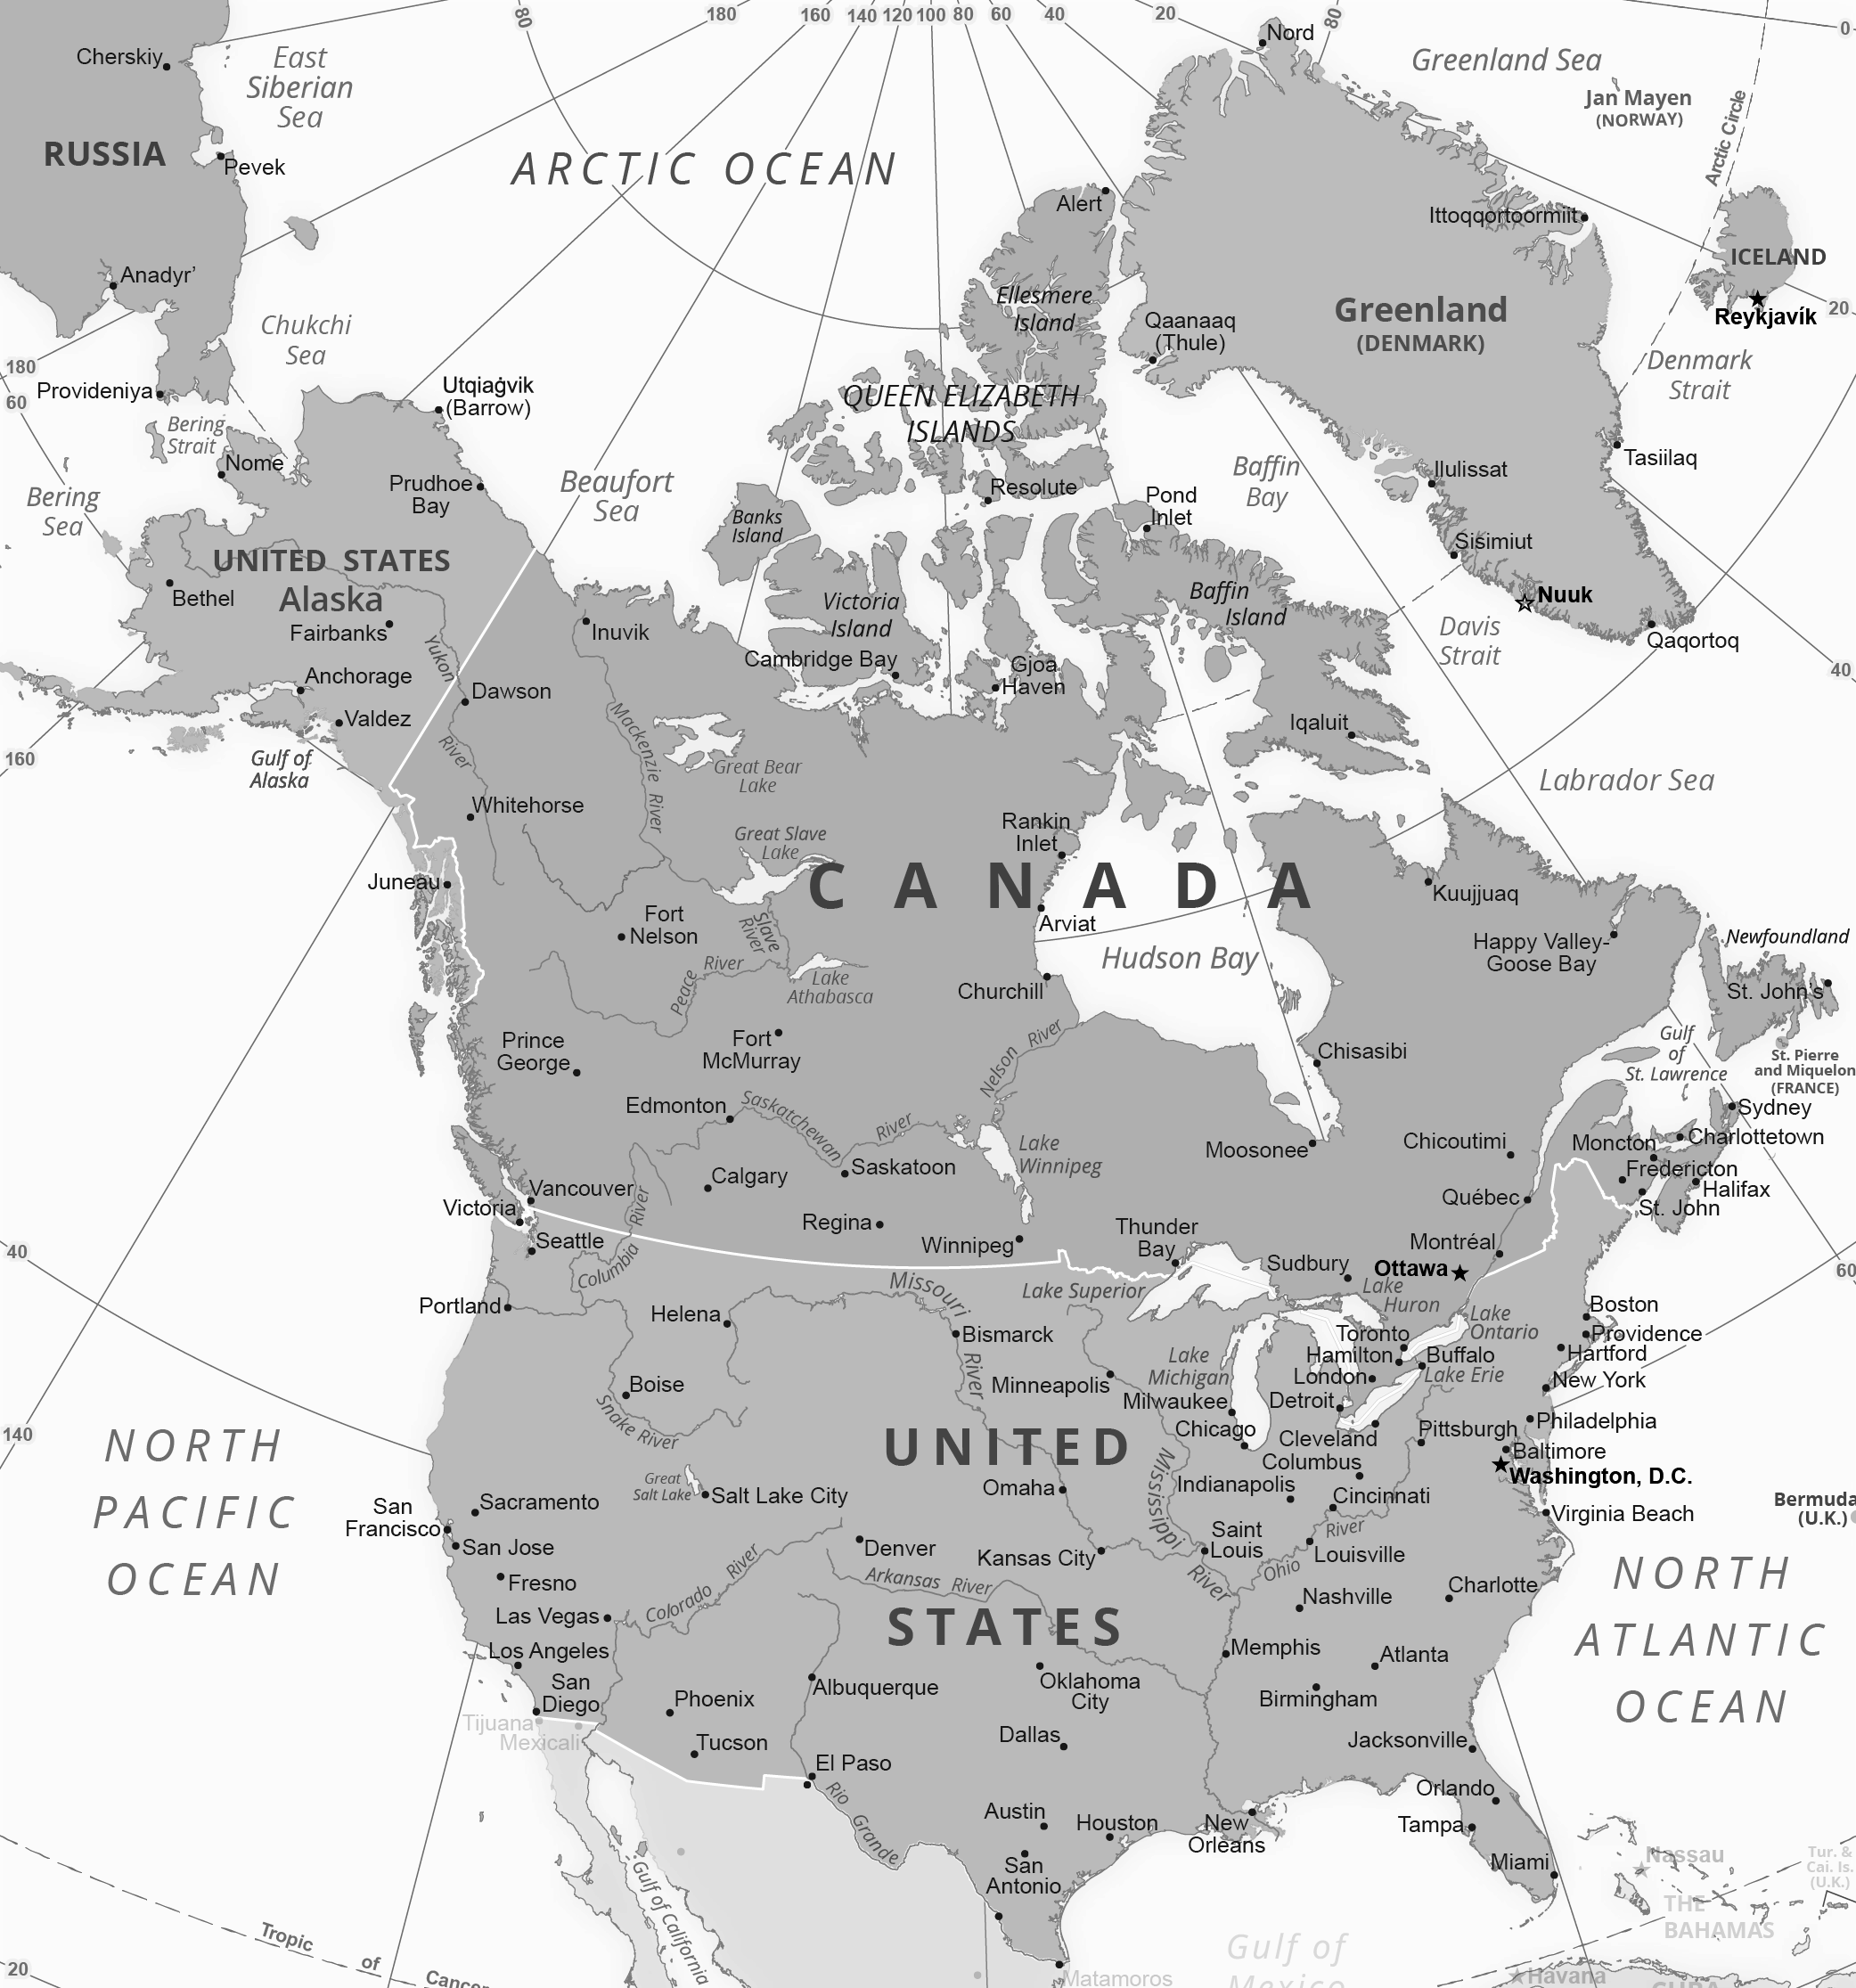 A black-and-white map of North America, including the United States, Canada, Greenland, and Iceland.